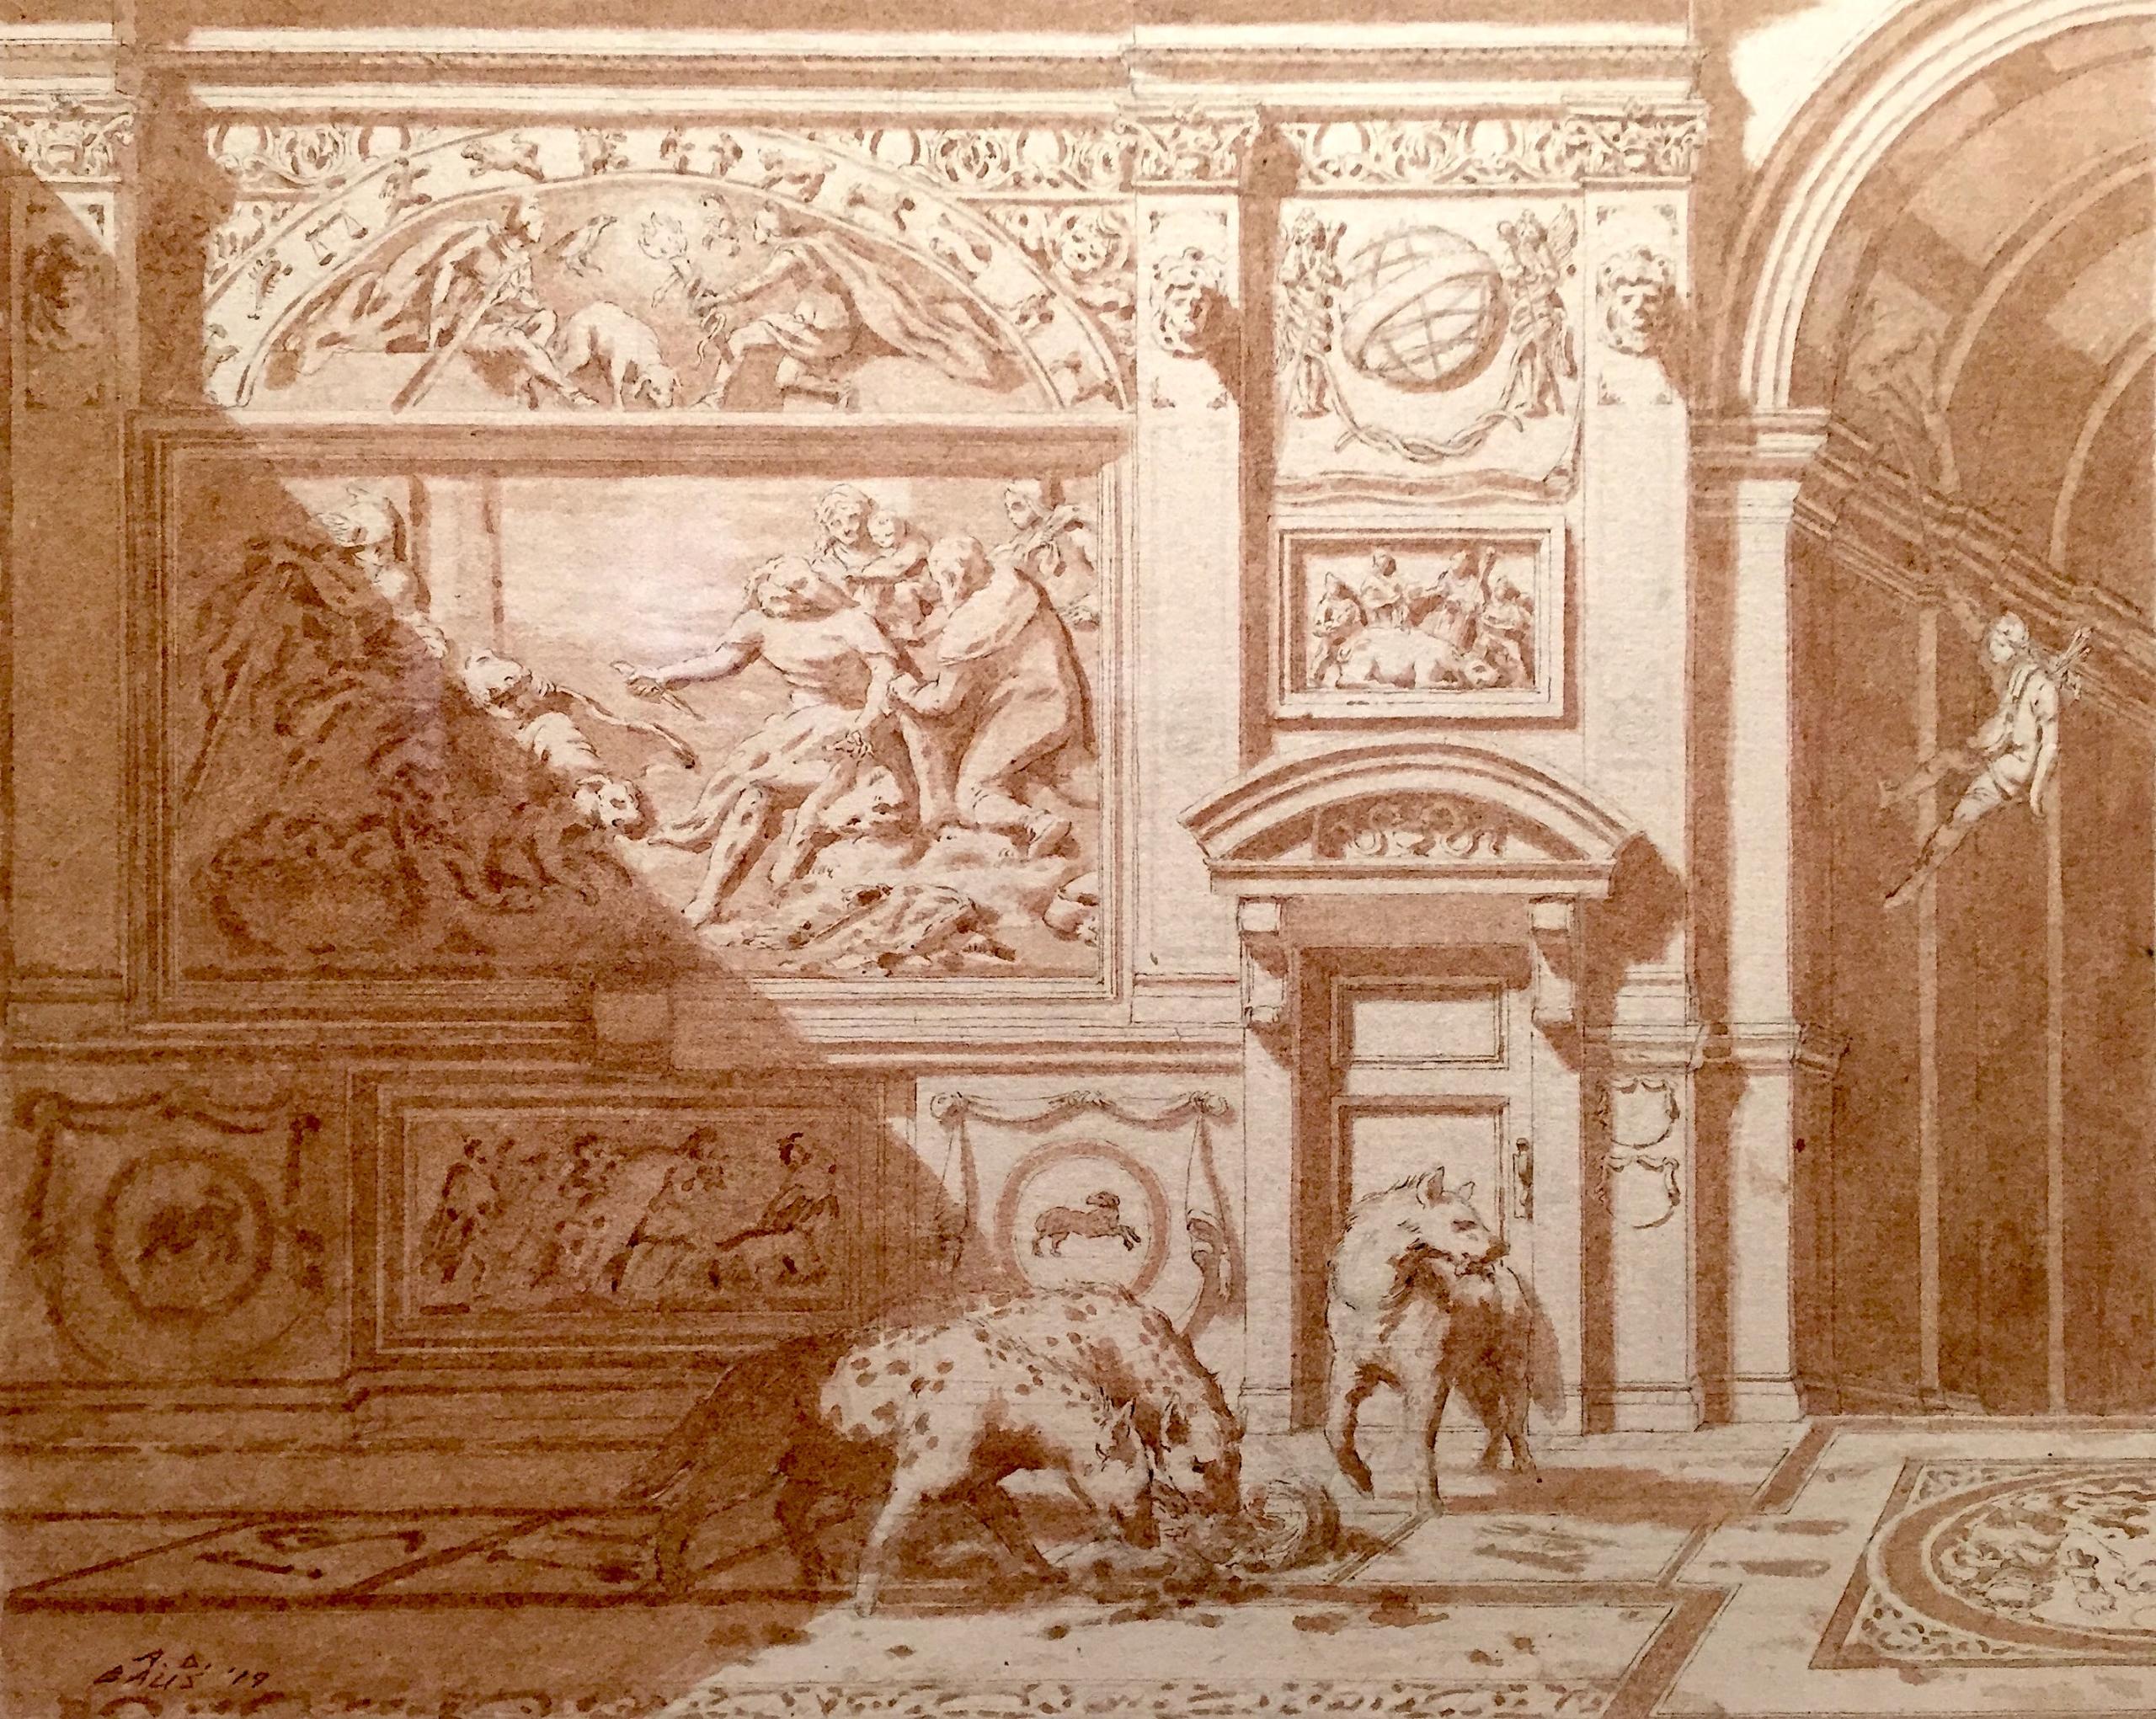 A print depicting a pack of hyenas under an ornate wall relief.